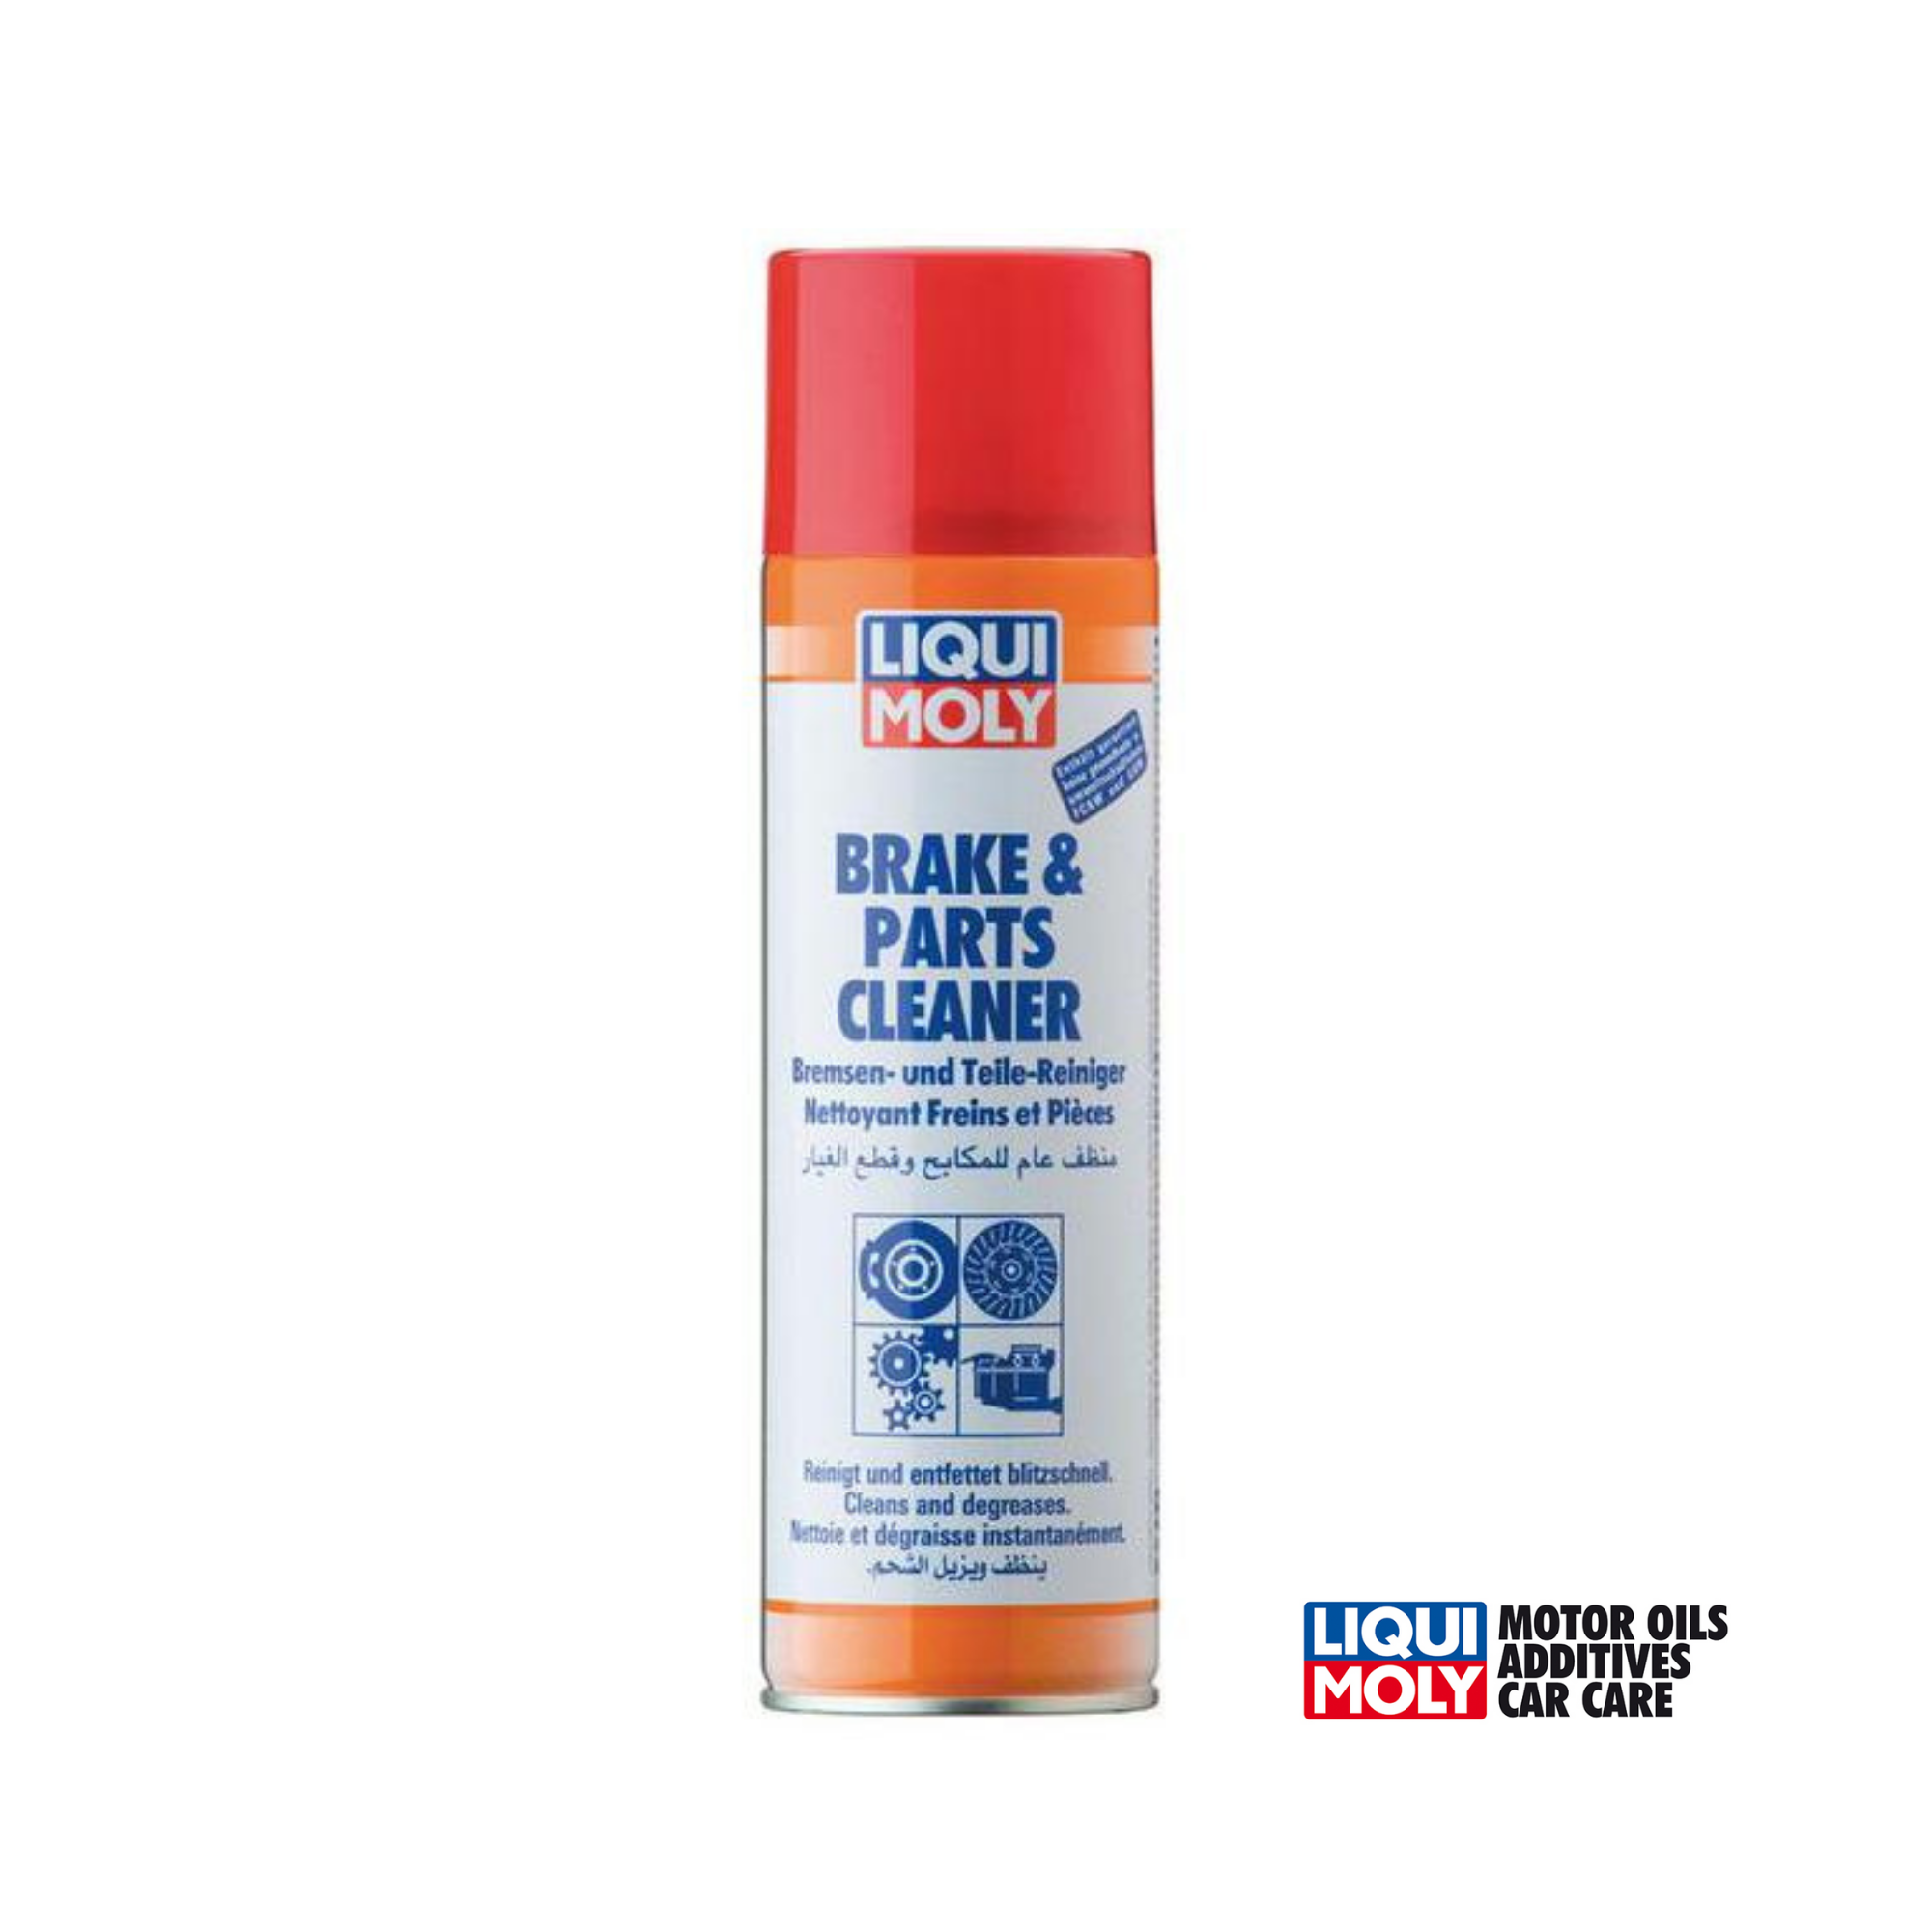 BRAKE AND PARTS CLEANER - LIQUI MOLY